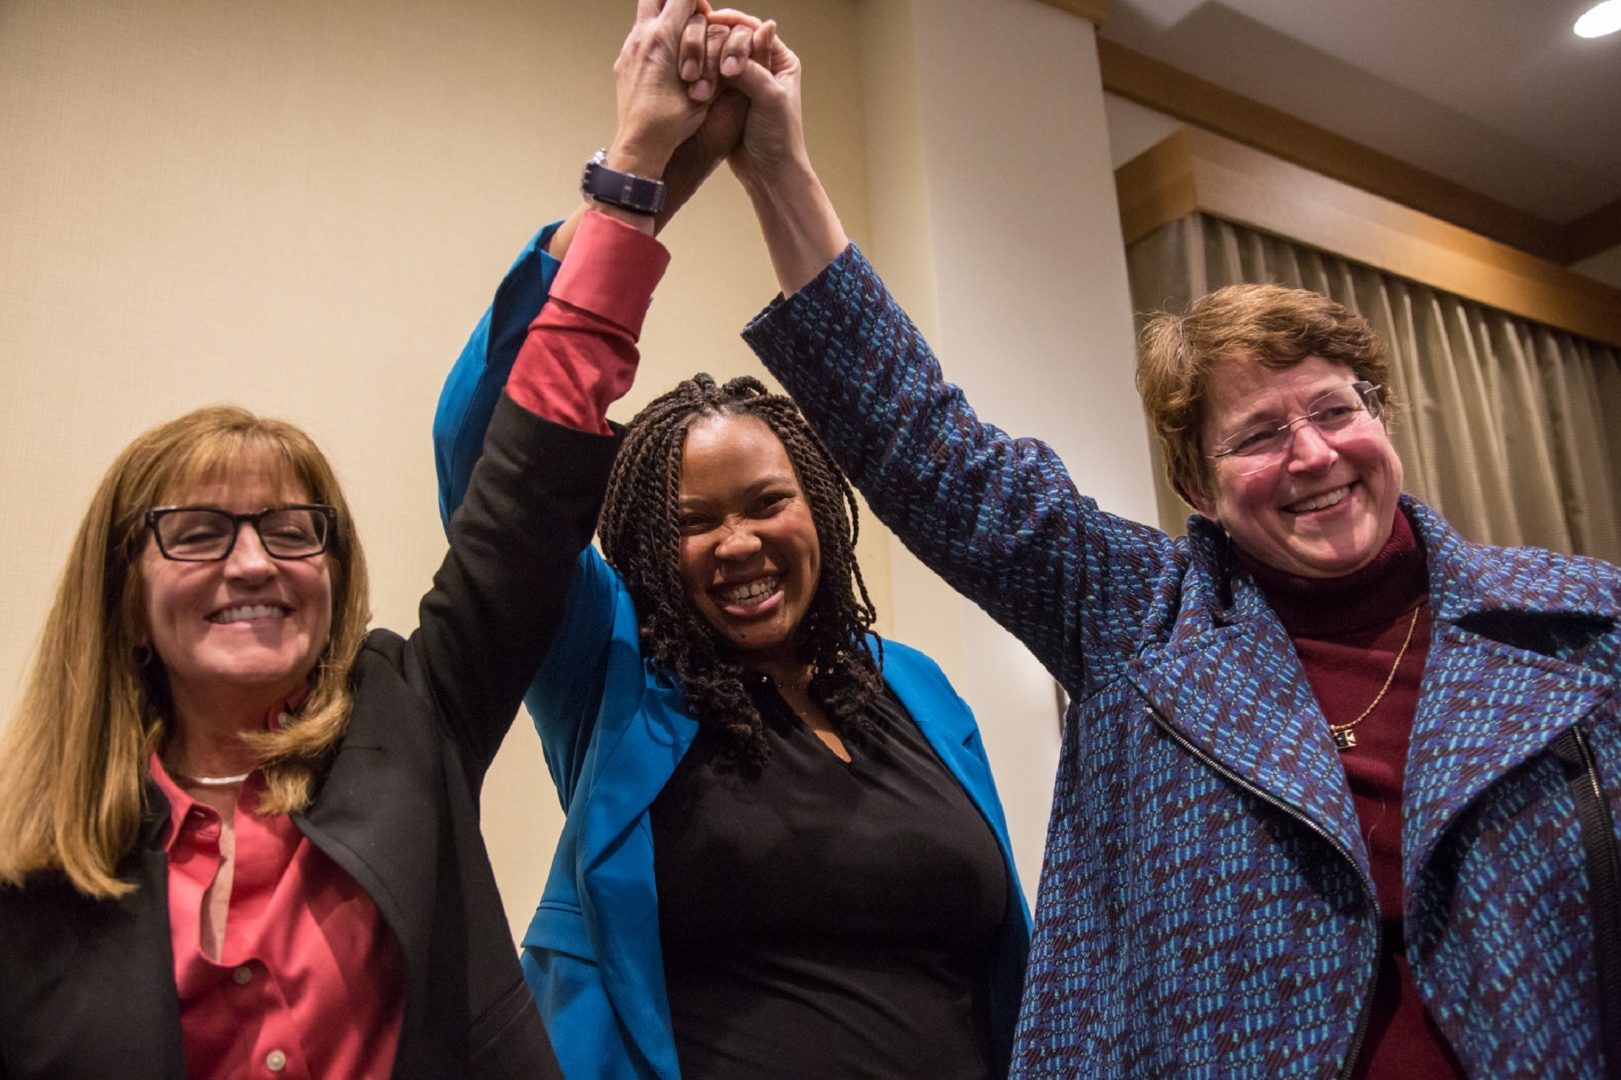 Democrats (from left) Elaine Paul Schaefer, Monica Taylor, and Christine Reuther celebrate their sweep of the three open seats on the Delaware County Council. Their win flips the majority on the council for the first time in county history. They celebrated at the Democratic election night party in Swarthmore November 5, 2019. 